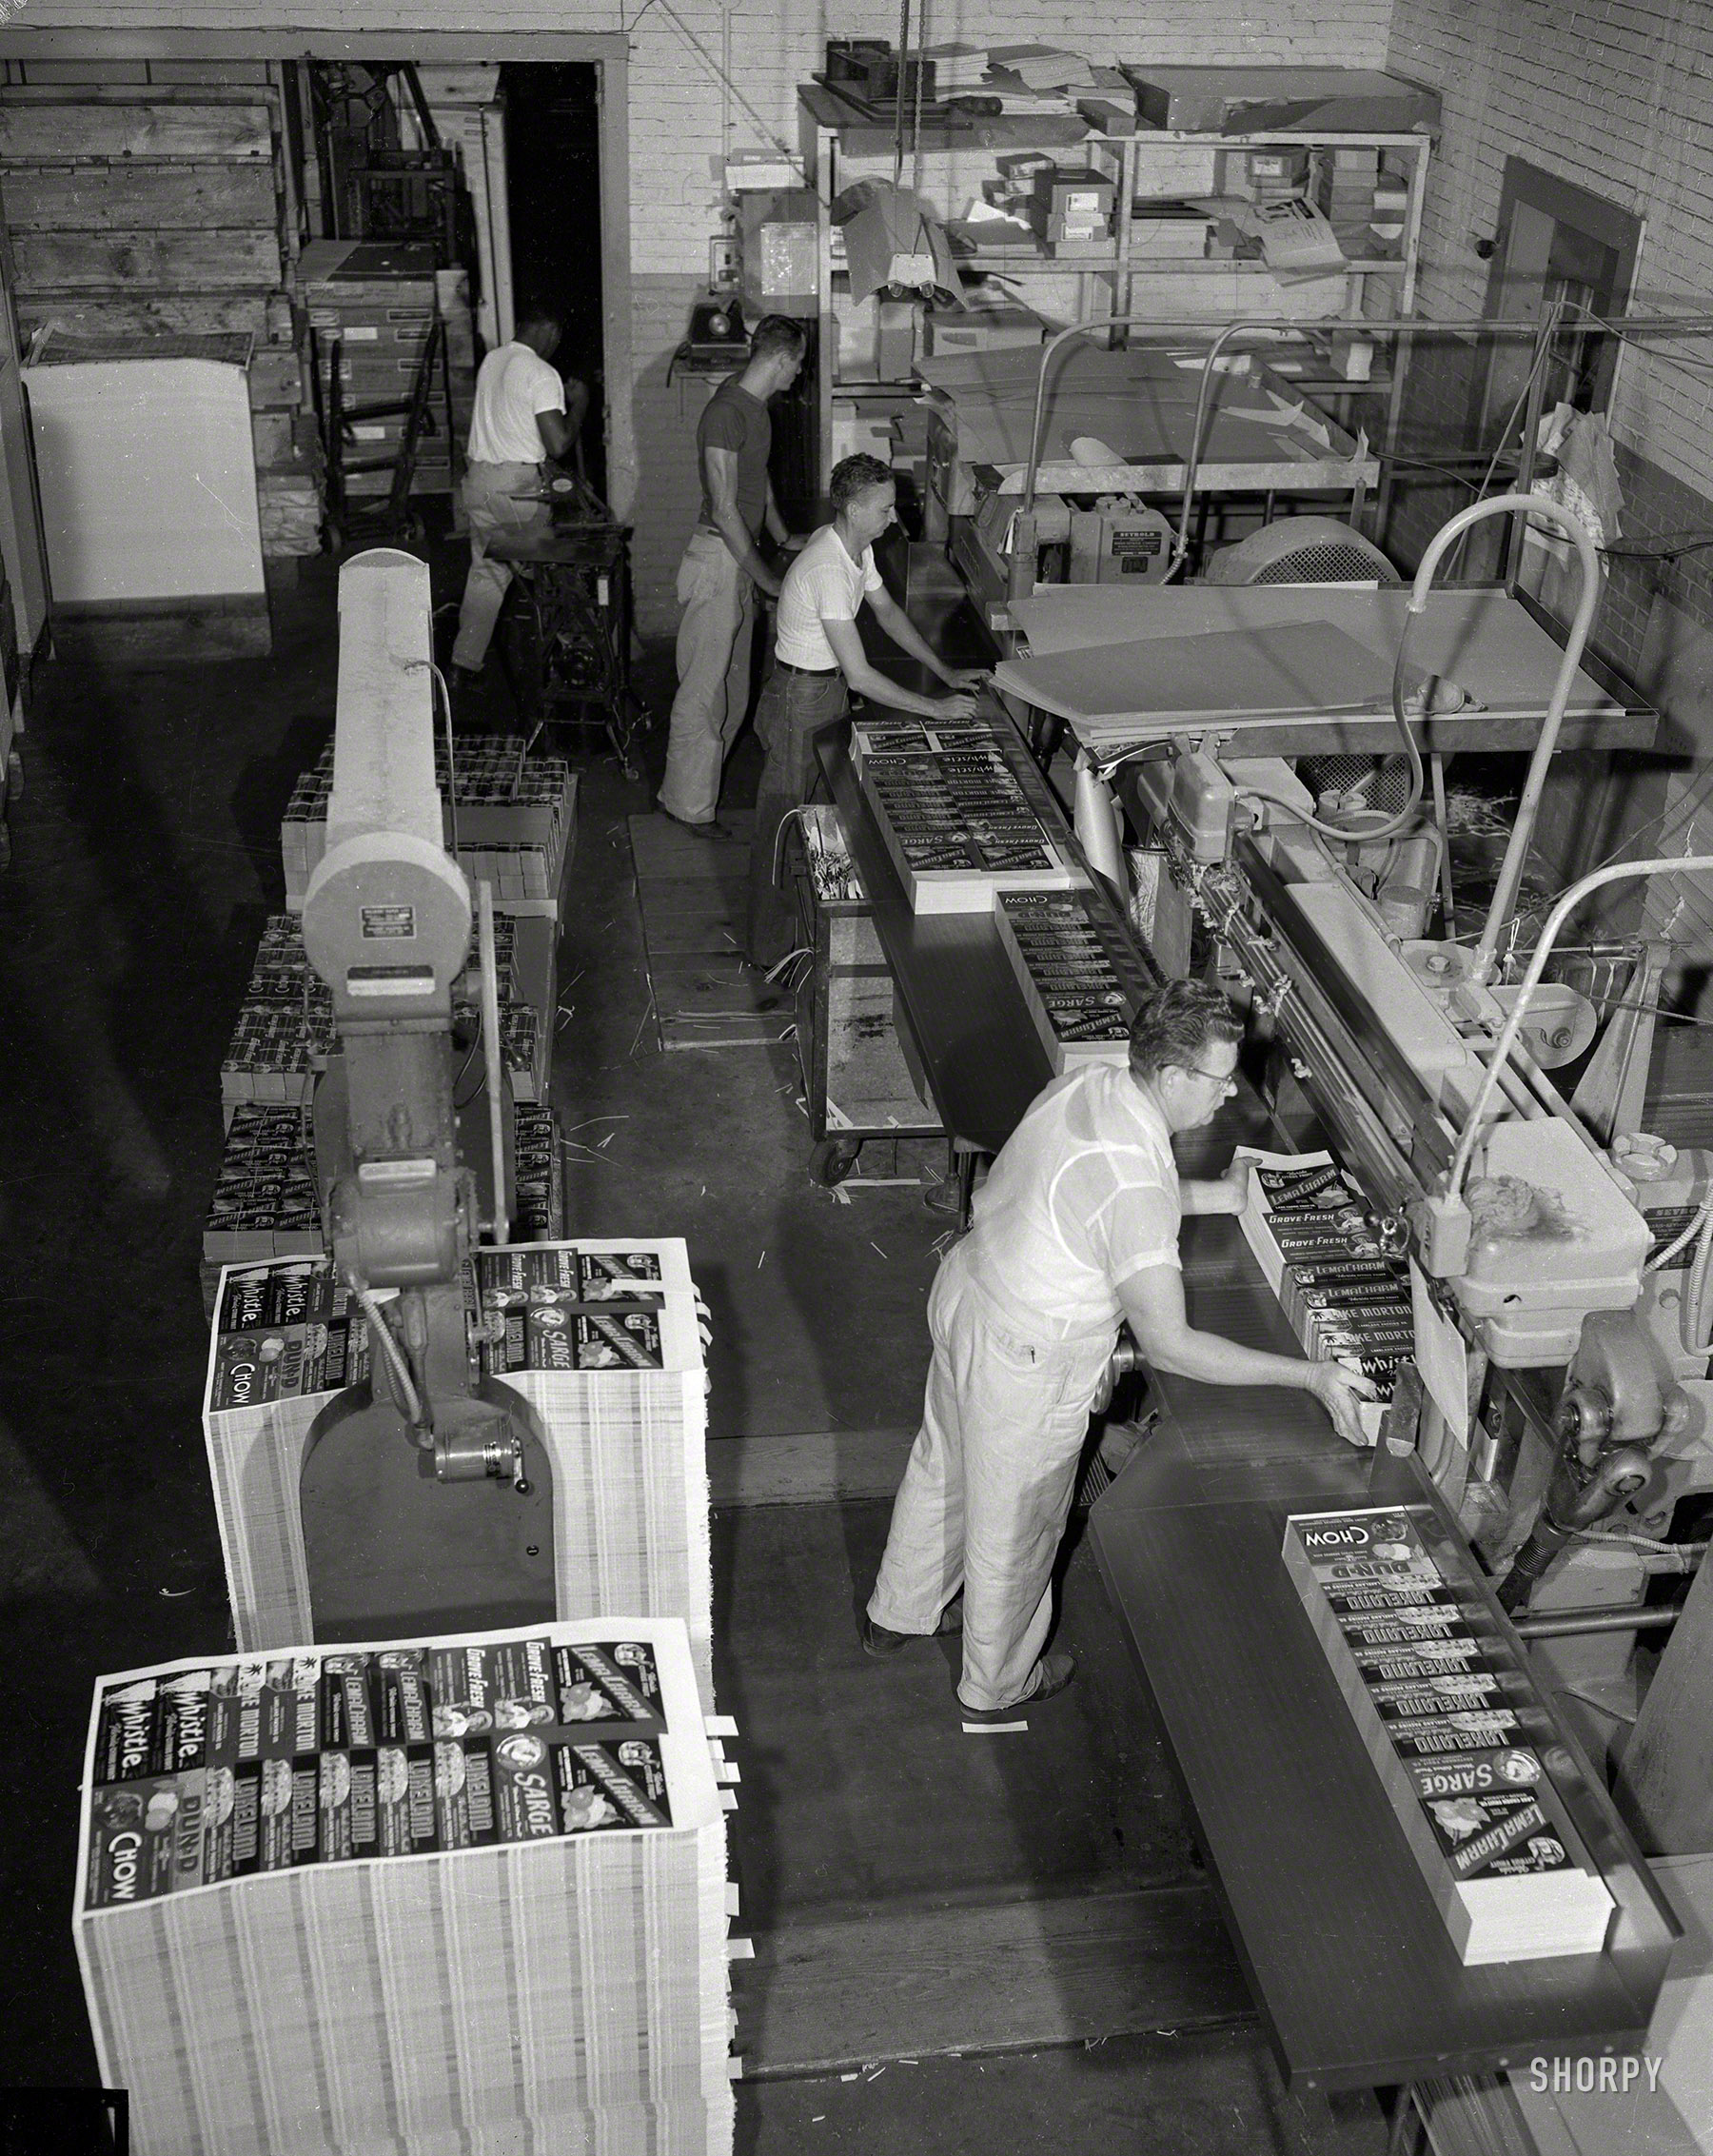 Columbus, Georgia, circa 1950, and a print shop making fruit crate labels, back in the days when apples and oranges had something like brand identity. 4x5 inch acetate negative from the Shorpy News Photo Archive. View full size.